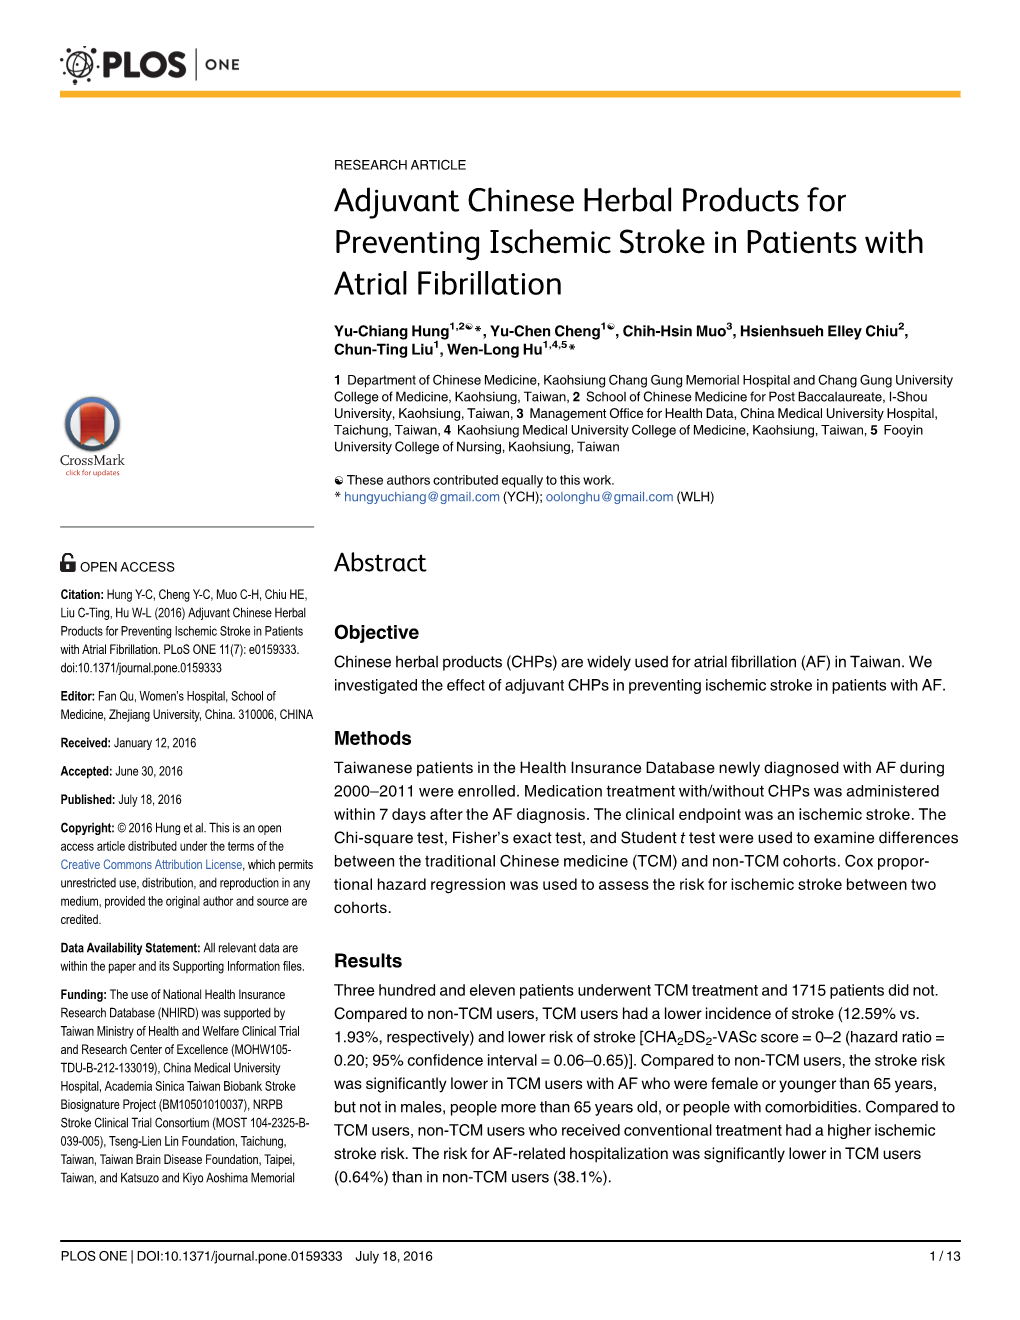 Adjuvant Chinese Herbal Products for Preventing Ischemic Stroke in Patients with Atrial Fibrillation